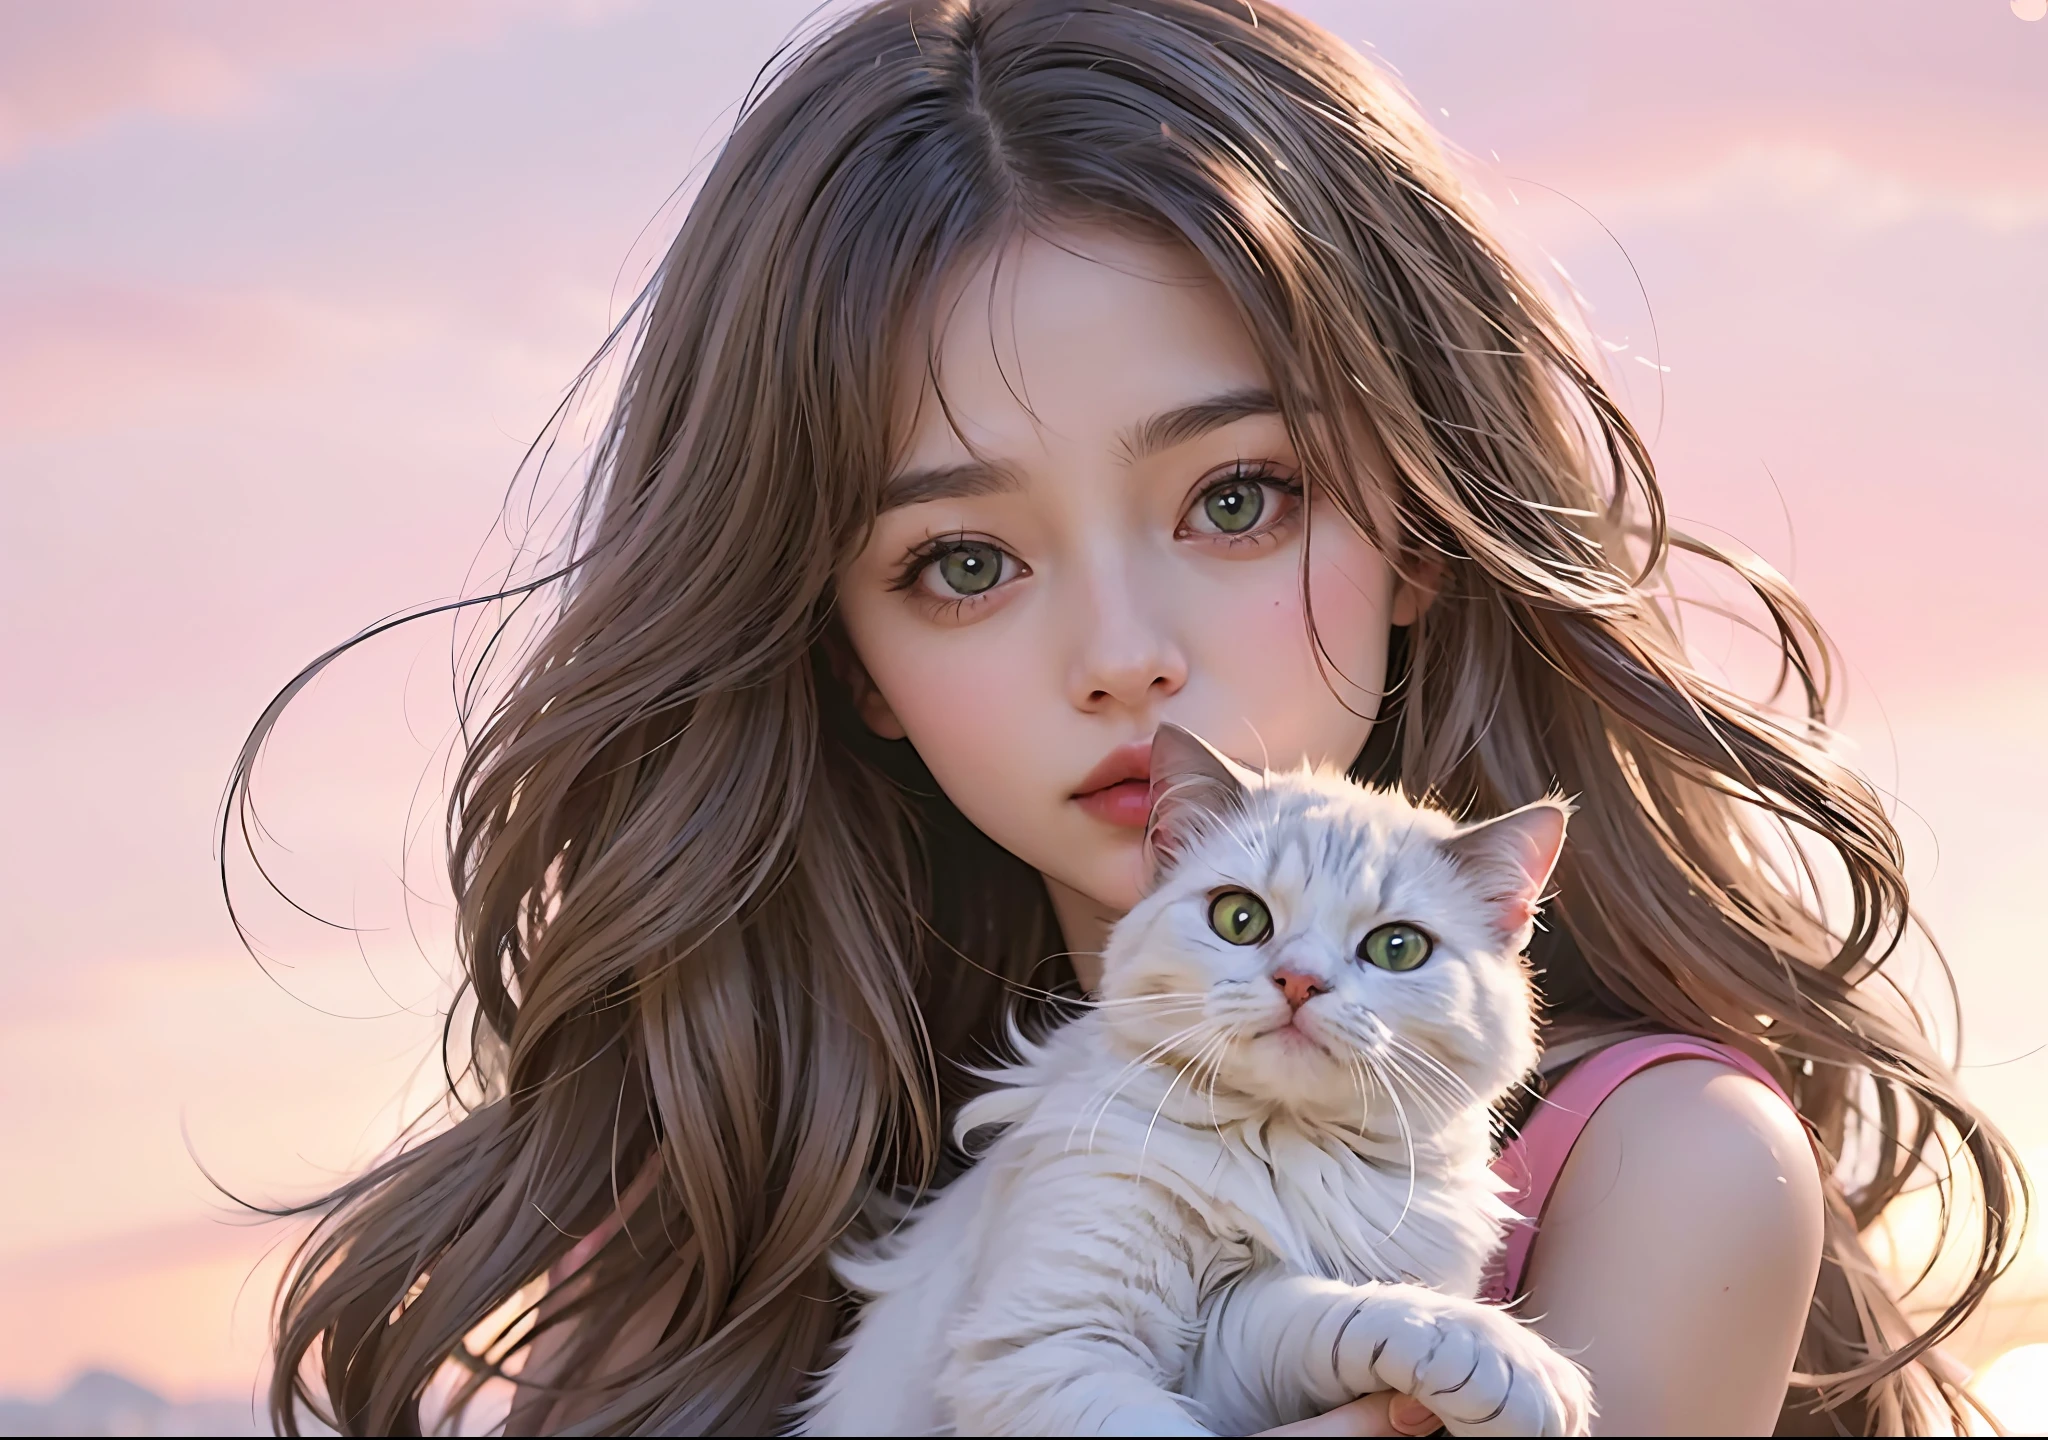 anime 女の子 with long hair holding a 白 猫 in her arms, very beautiful cute 猫女の子, beautiful anime 猫女の子, cute anime 猫女の子, グウェイズ, very beautiful anime 猫 女の子, かわいいアートスタイル, beautiful young 猫女の子, 白 ( 猫 ) 女の子, attractive 猫 女の子, artwork in the style of グウェイズ, 白 猫 女の子, anime 猫女の子